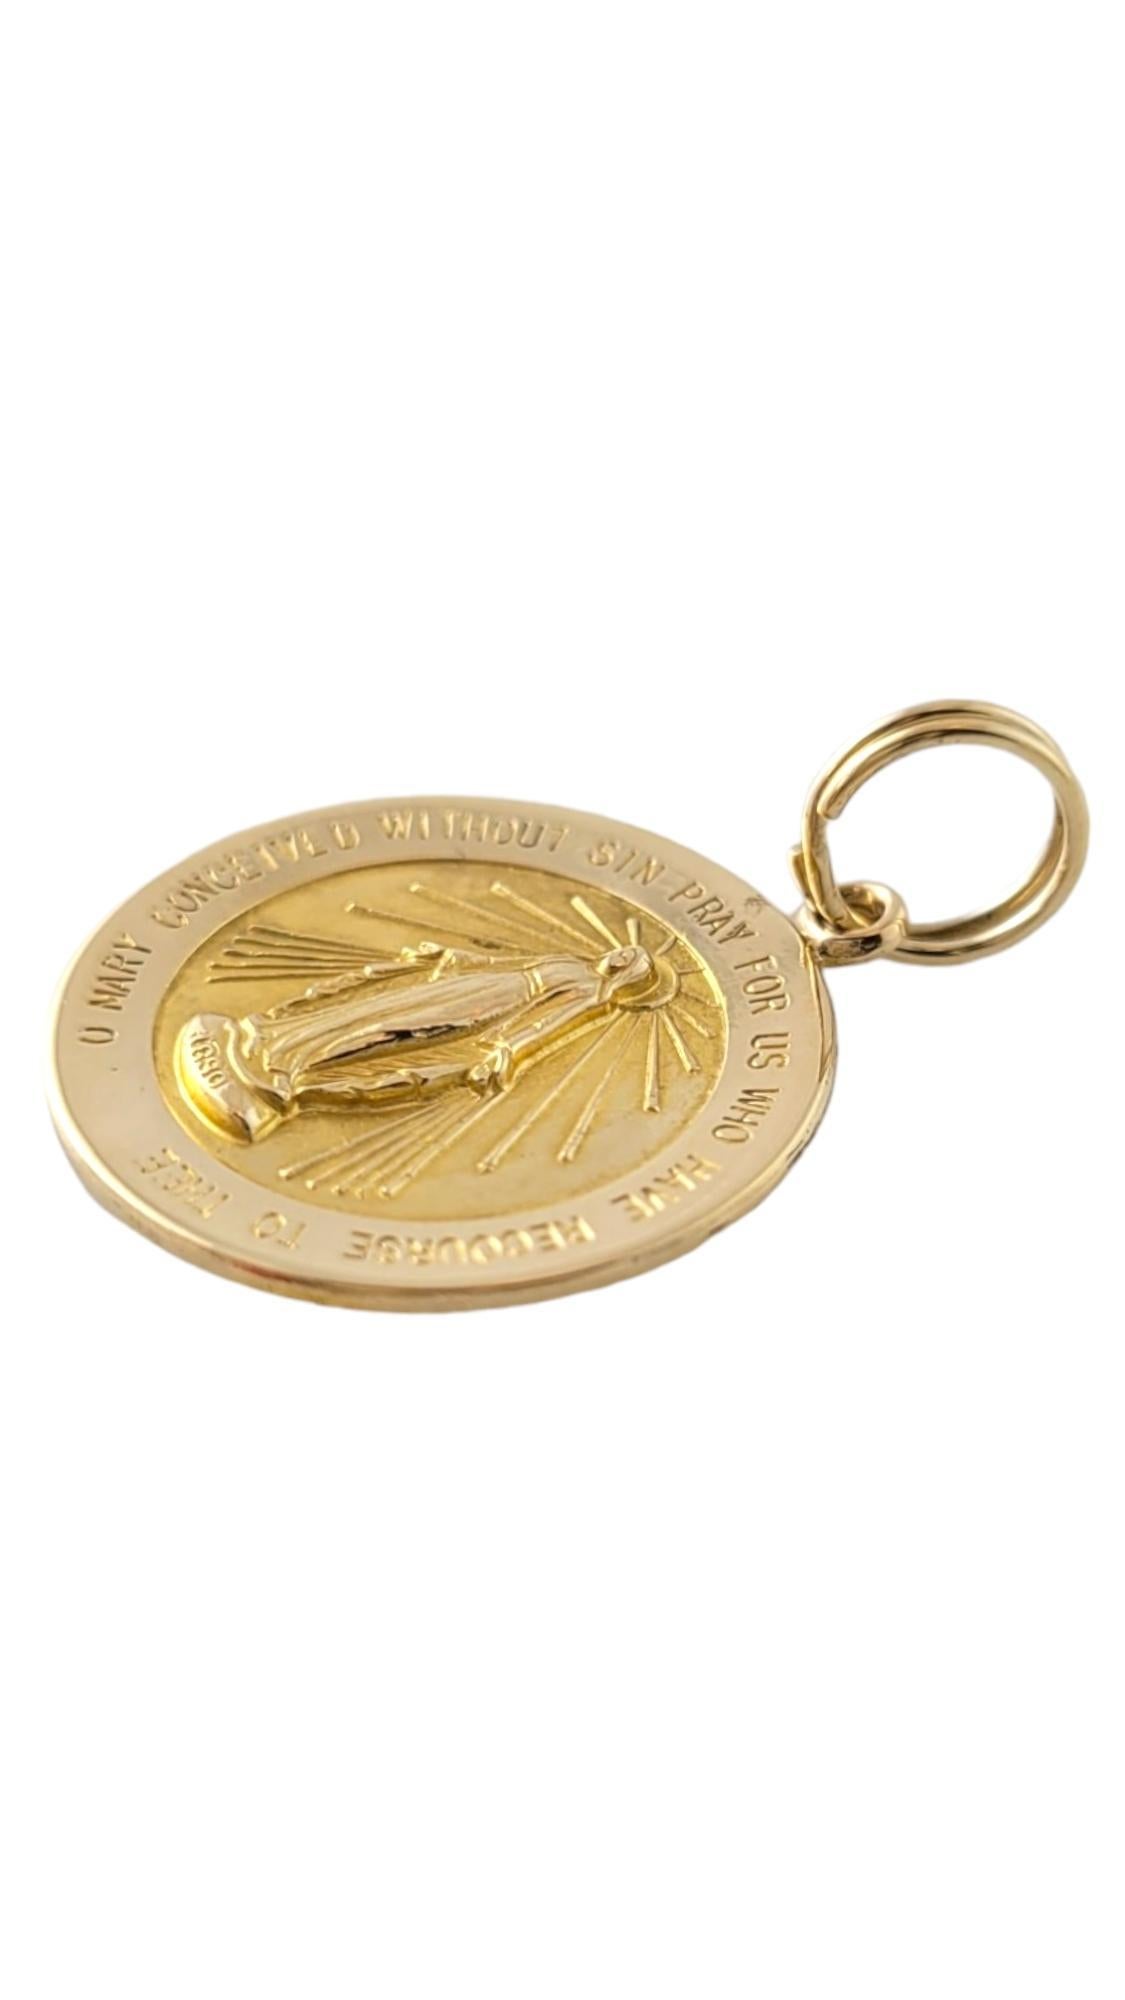 14K Yellow Gold Miraculous Mary Pendant #16879

This beautiful 14K yellow gold Miraculous Mary pendant is perfect for you!

Size: 23.6mm X 20.7mm X 1.2mm

Weight: 1.8 dwt/ 2.8 g

Hallmark: 14K

Very good condition, professionally polished.

Will